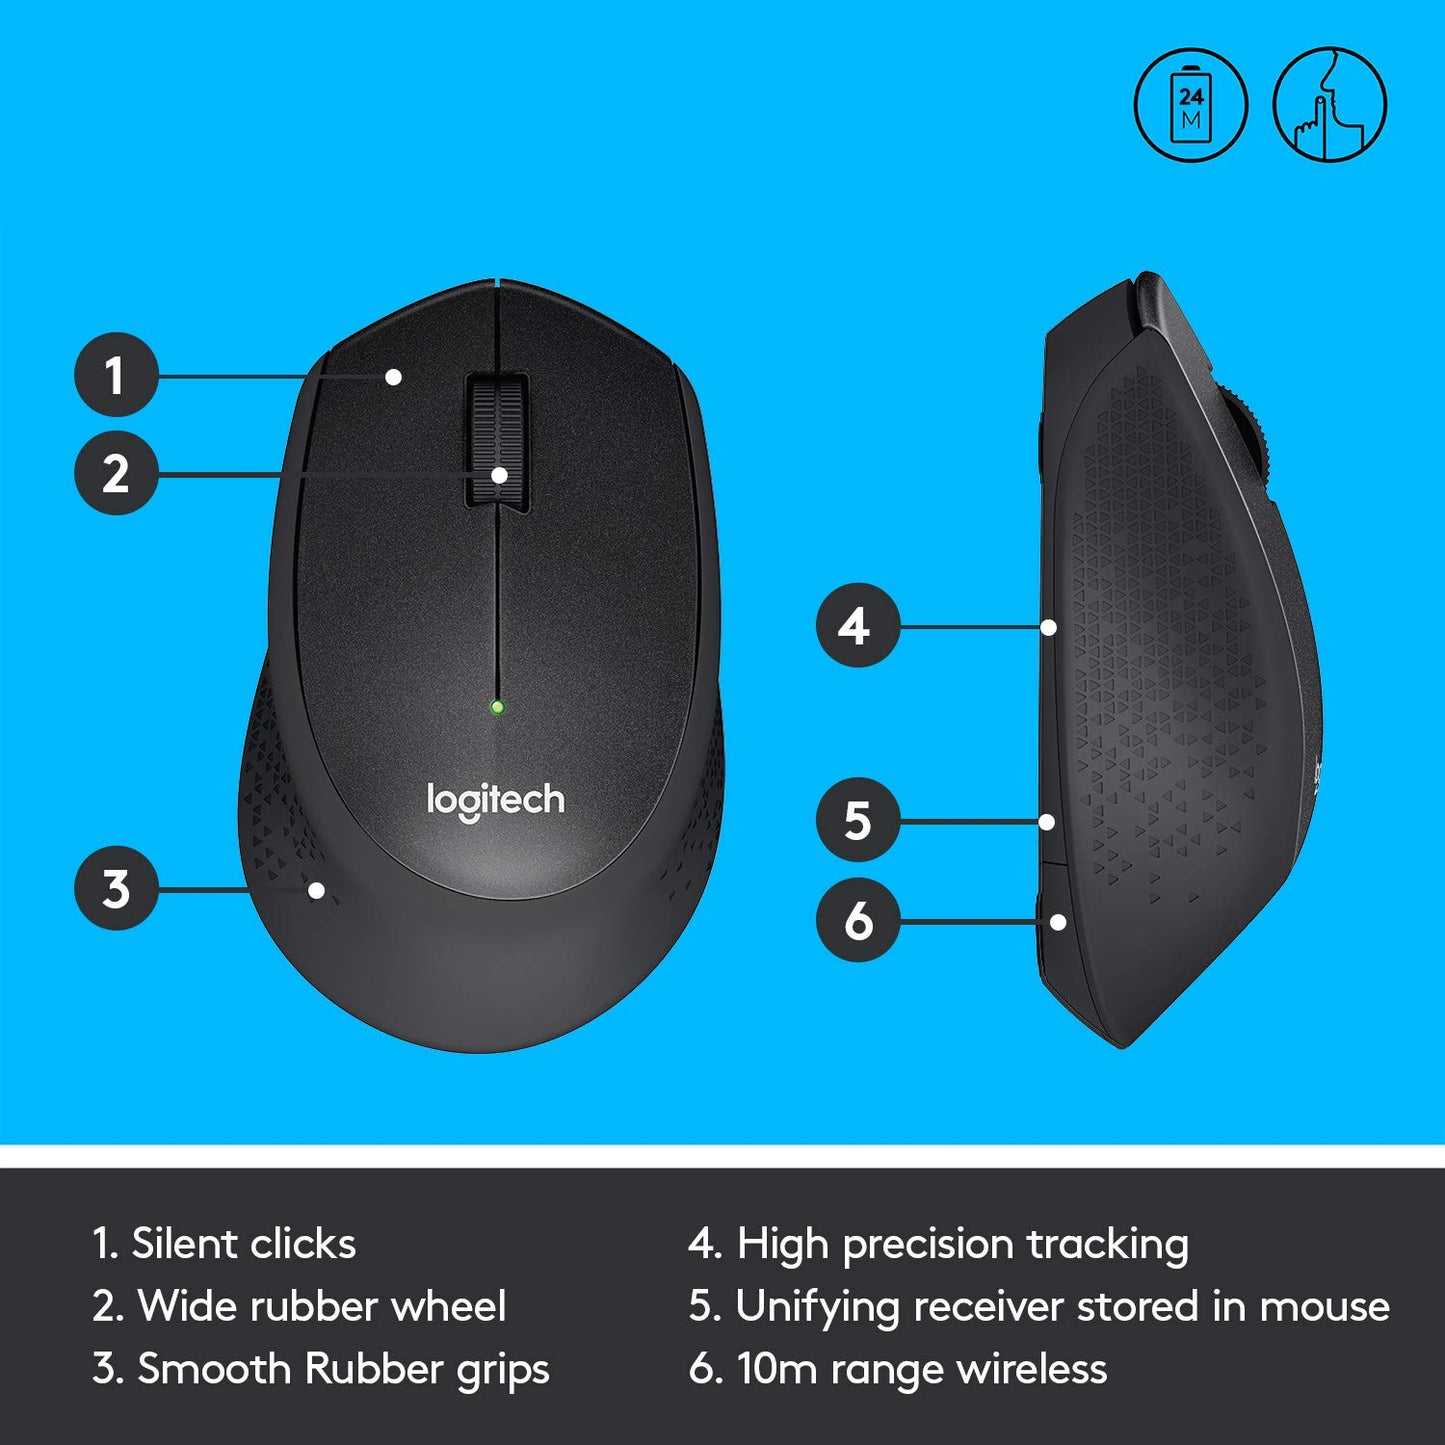 Logitech M331 Silent Plus Wireless Optical Mouse Black with 1000DPI and 2.4 GHz Technology